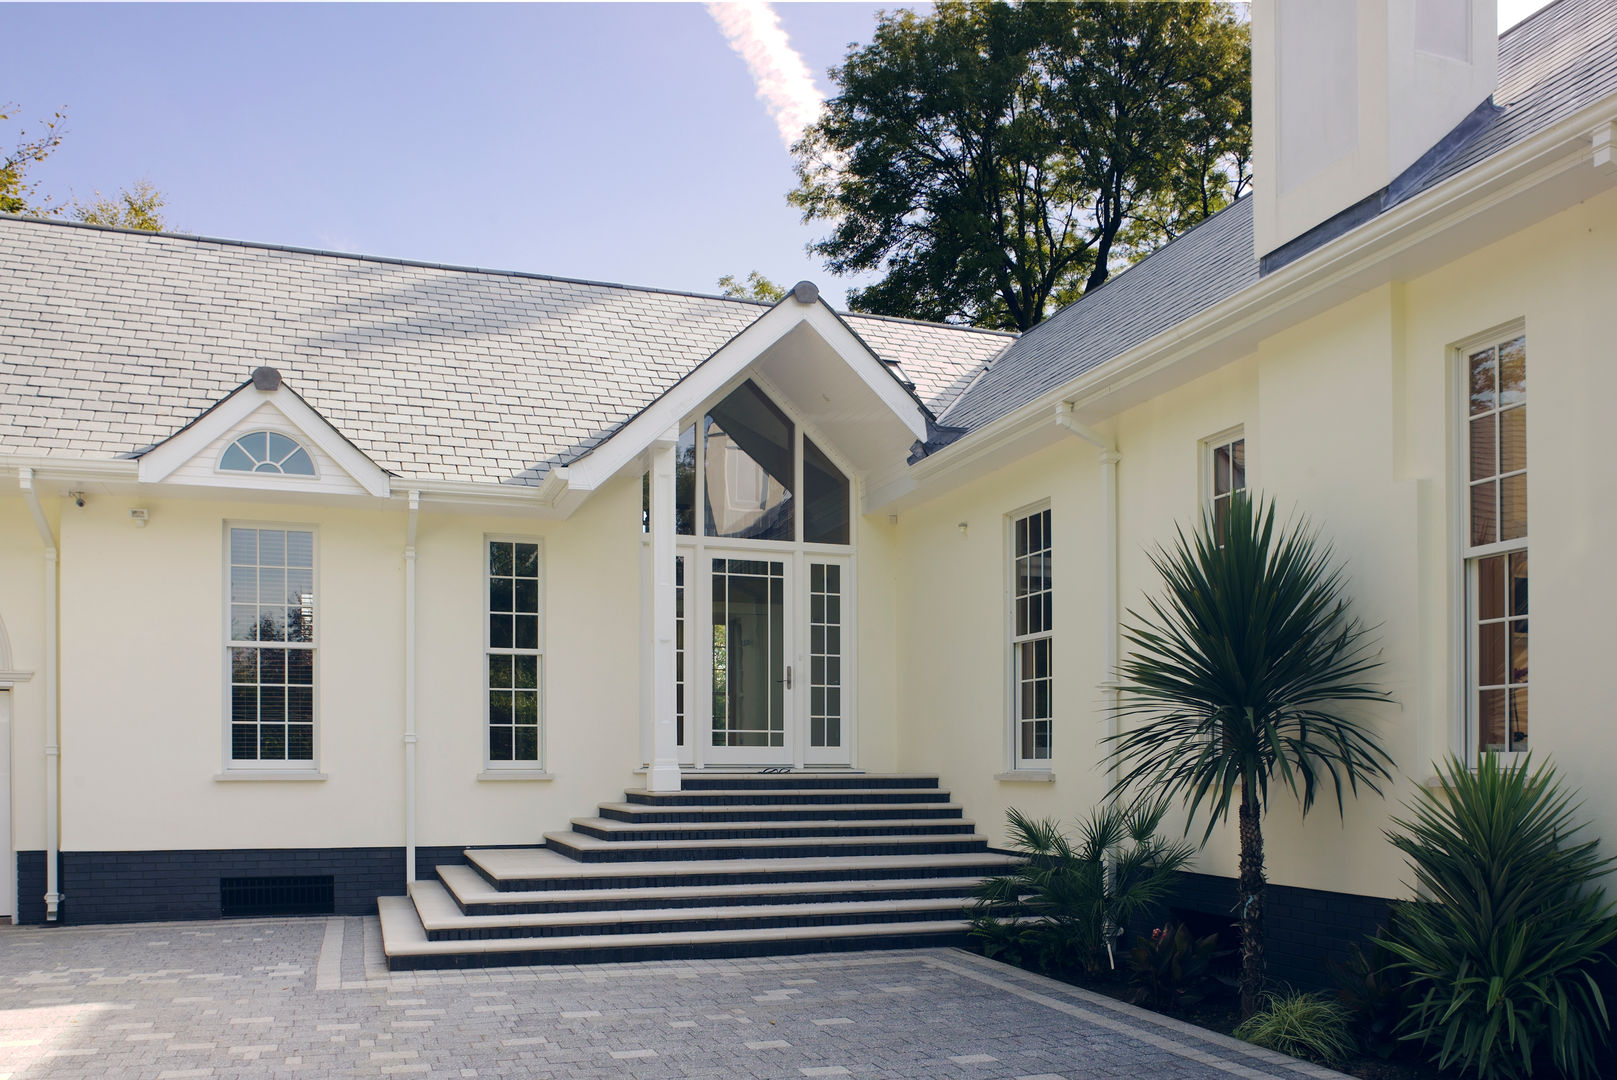 Neo Classical Design For New Build Family Home, Marvin Windows and Doors UK Marvin Windows and Doors UK شبابيك